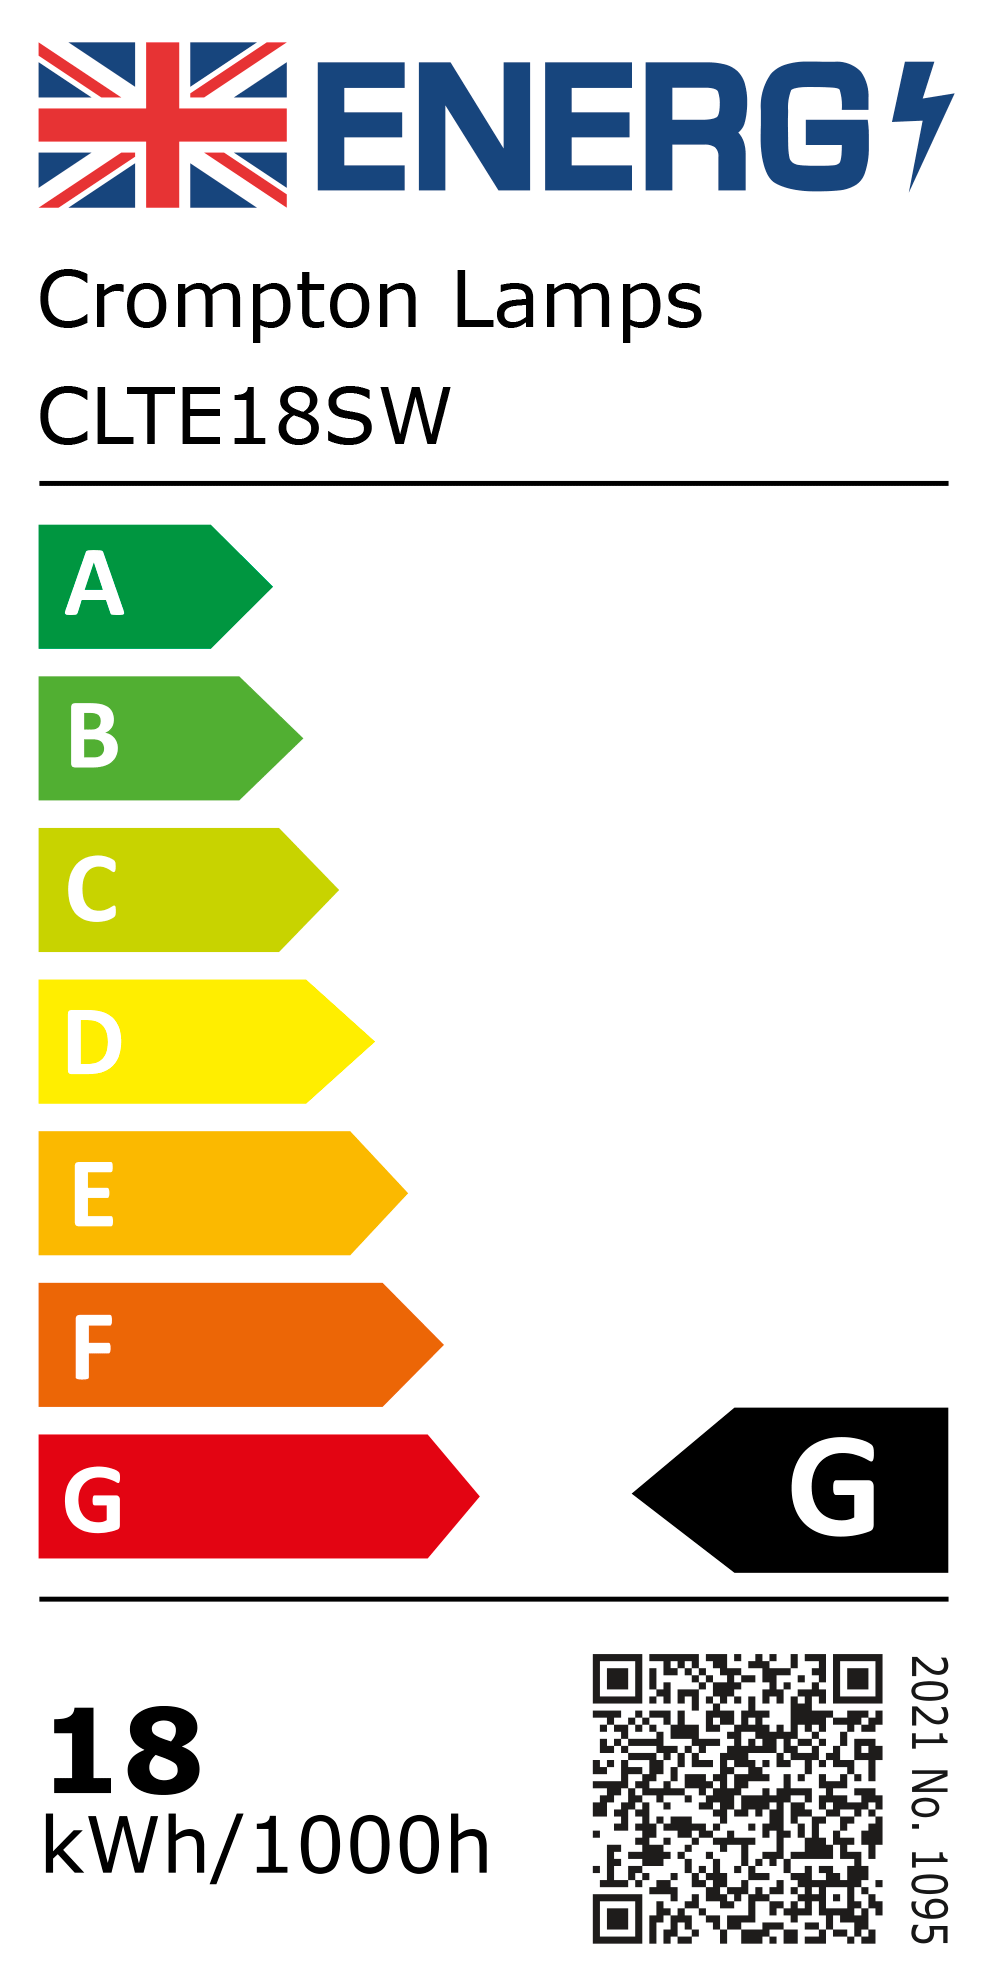 New 2021 Energy Rating Label: Stock Code CLTE18SW